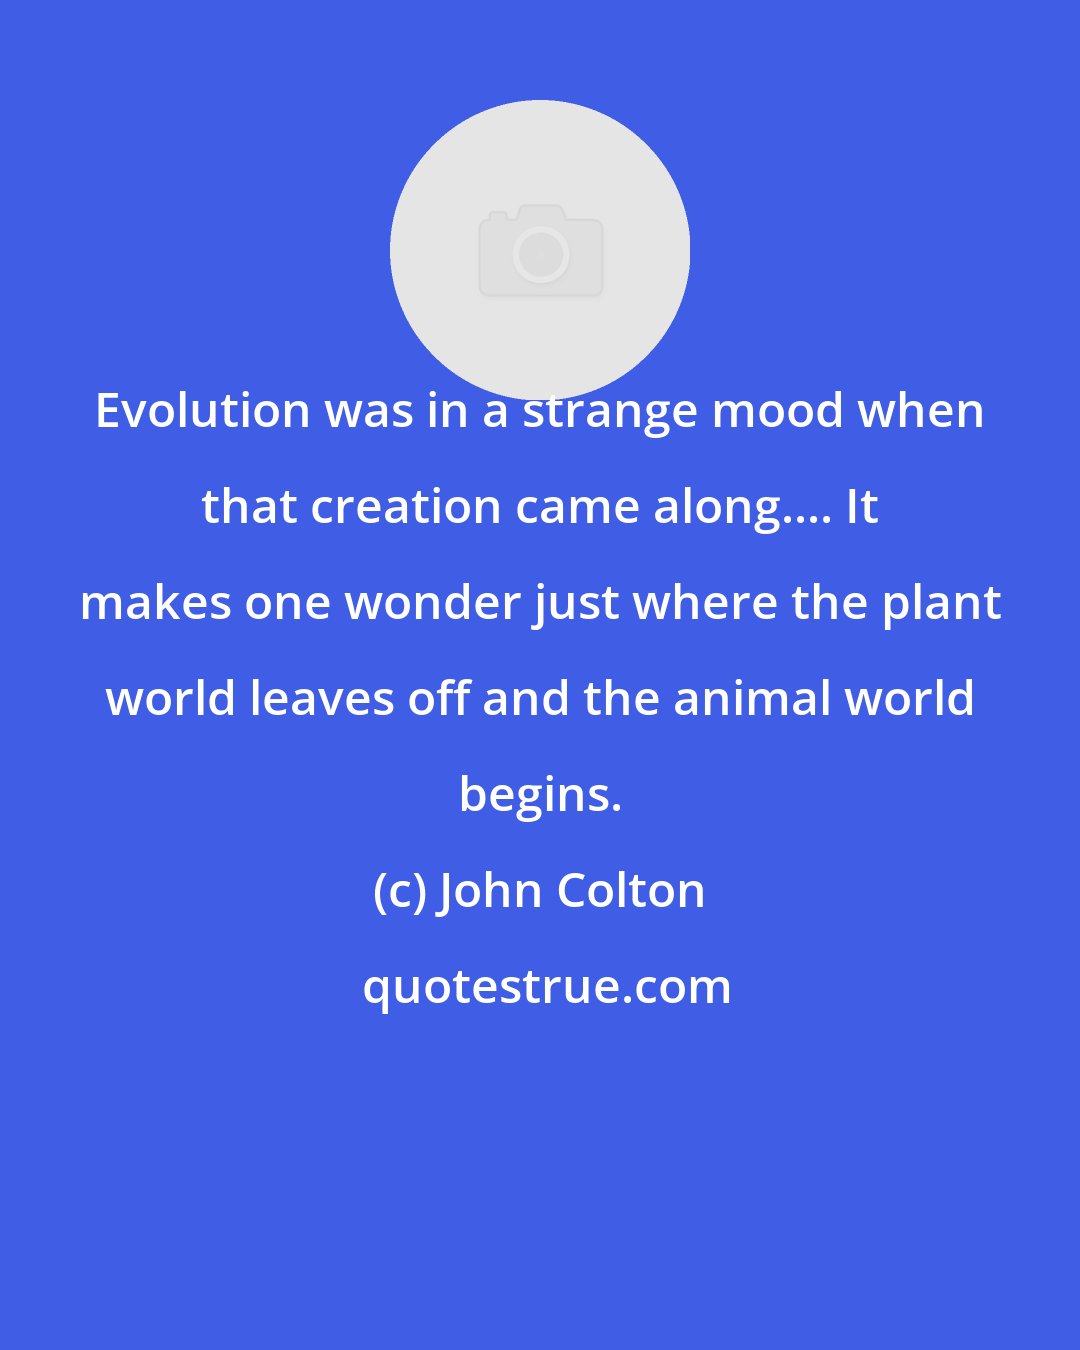 John Colton: Evolution was in a strange mood when that creation came along.... It makes one wonder just where the plant world leaves off and the animal world begins.